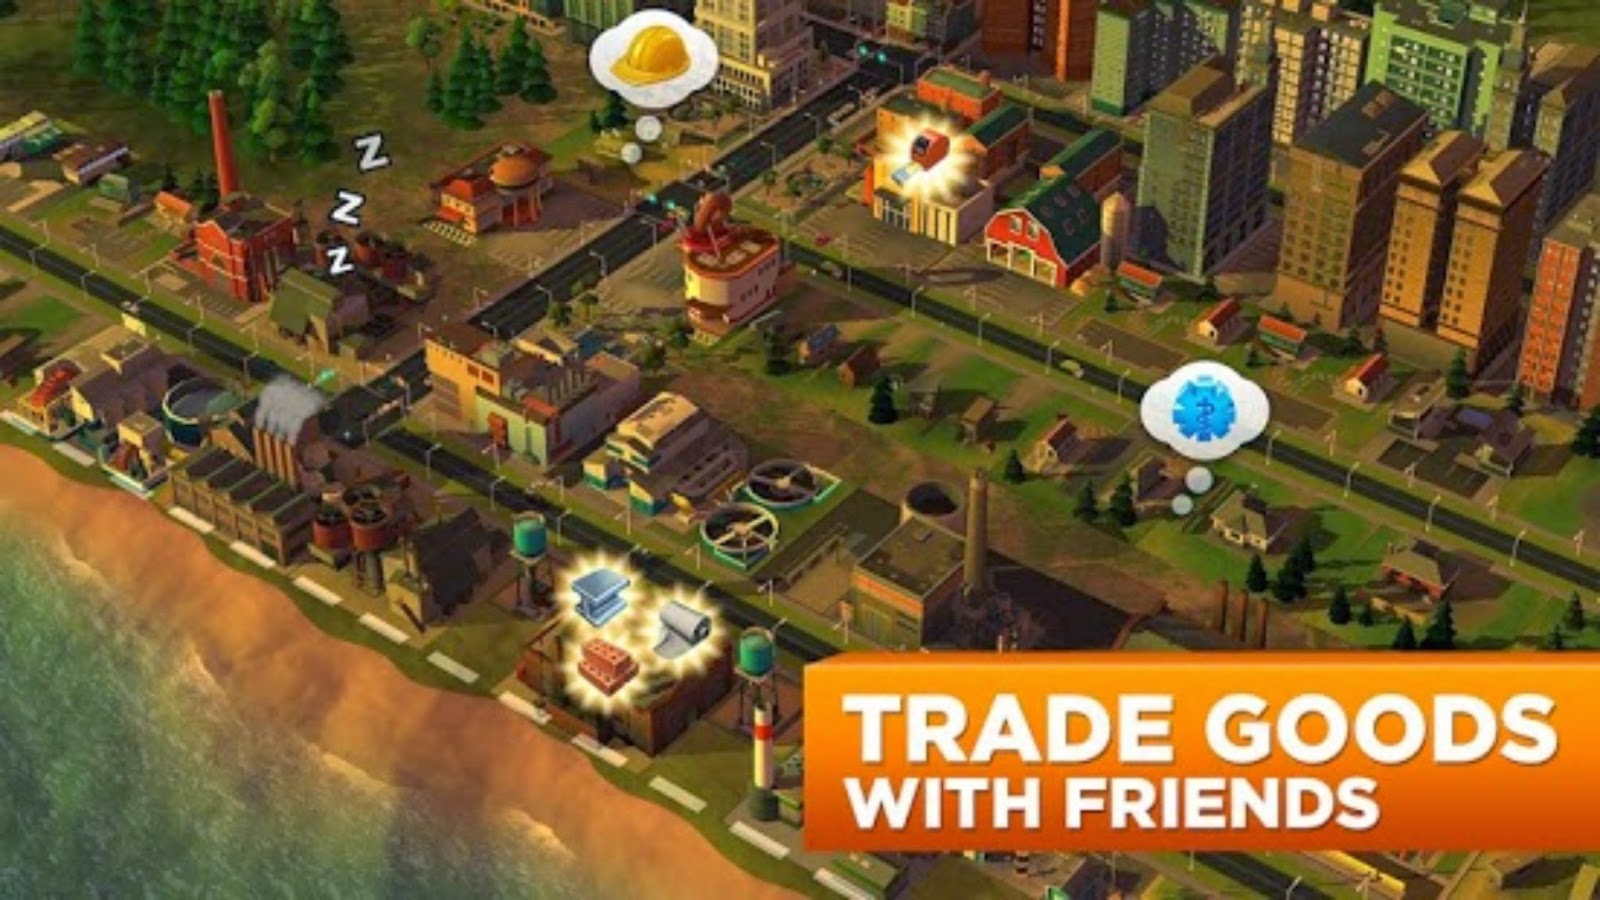 SimCity BuildIt Apk+Data v1.3.4.26938 Full Android